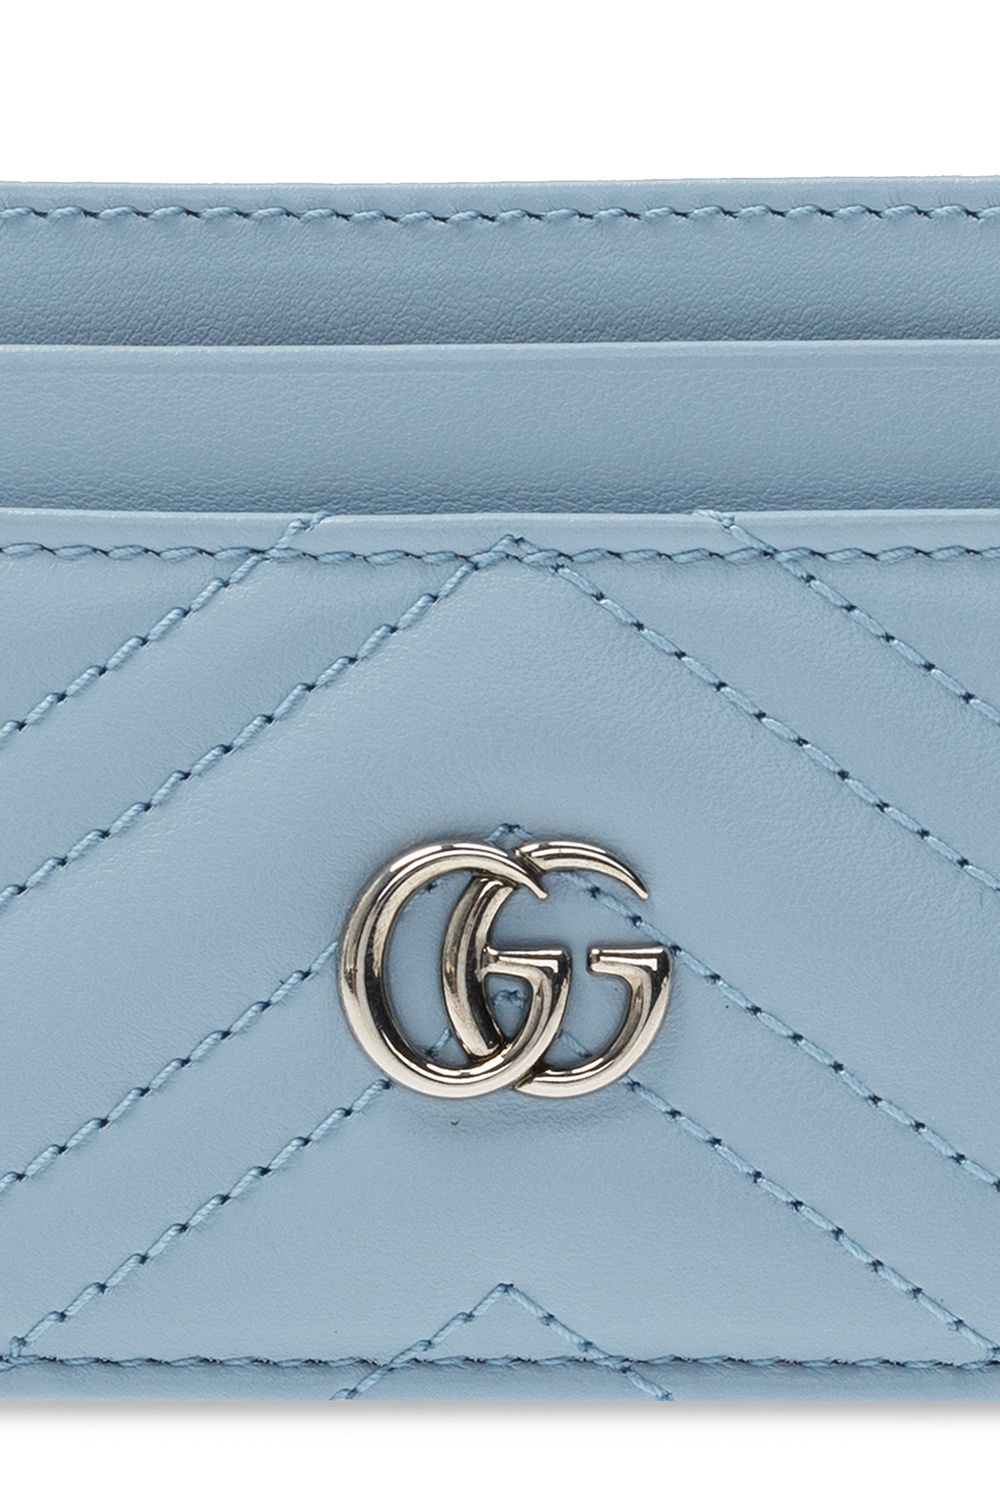 gg marmont card holder